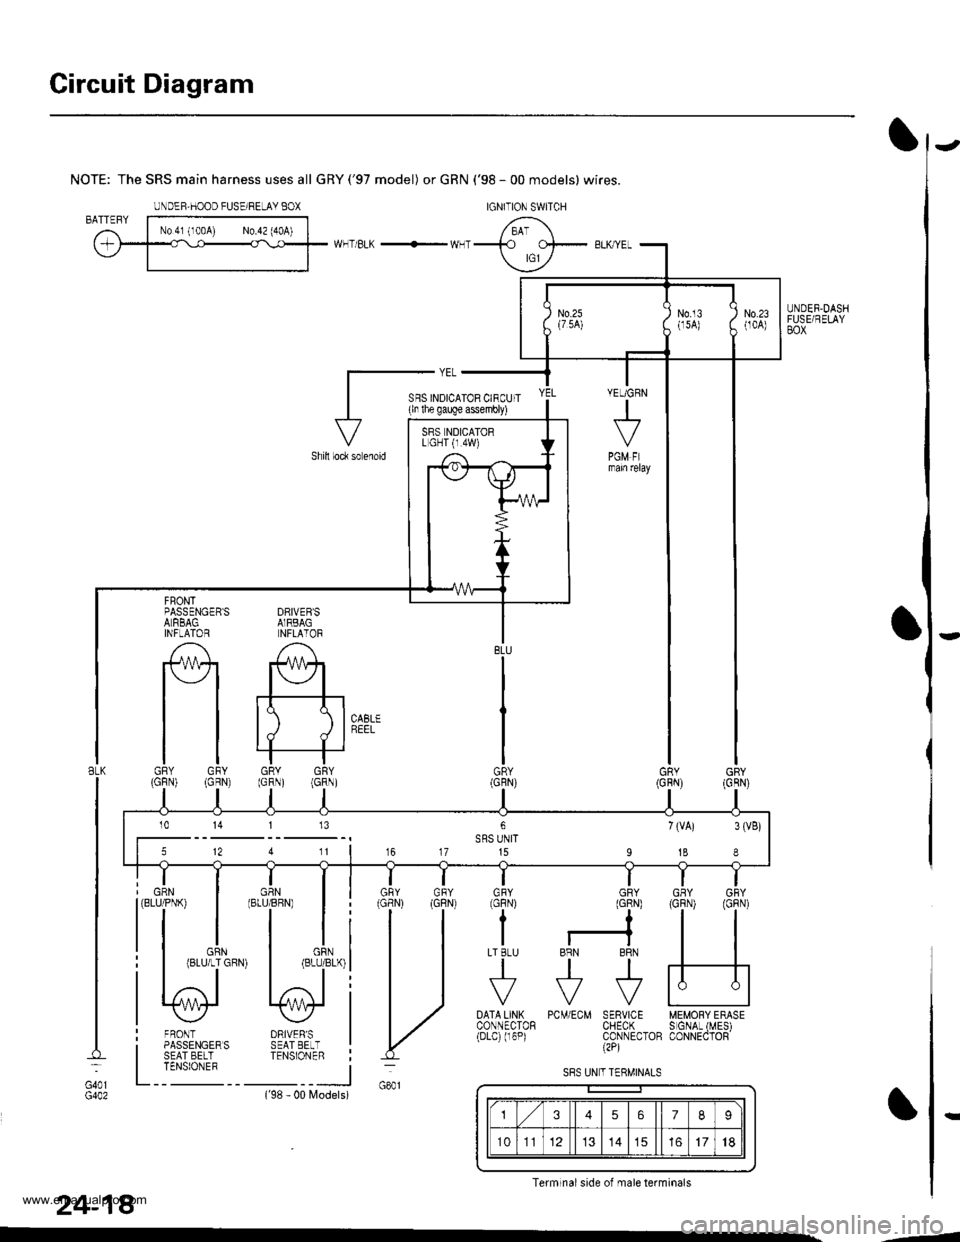 HONDA CR-V 1999 RD1-RD3 / 1.G Owners Manual 
Circuit Diagram
UNDER.DASHFUSE/RELAYBOX
NOTE: The SRS main harness uses all GRY(97 model) or GRN (98 - 00 models) wires.
WHT/BLK -- WHT
DRIVEBSAIRBAGNFLATOR
A
#+
tt tll./ d I
GRY GRY(GRN) (GRN)
F